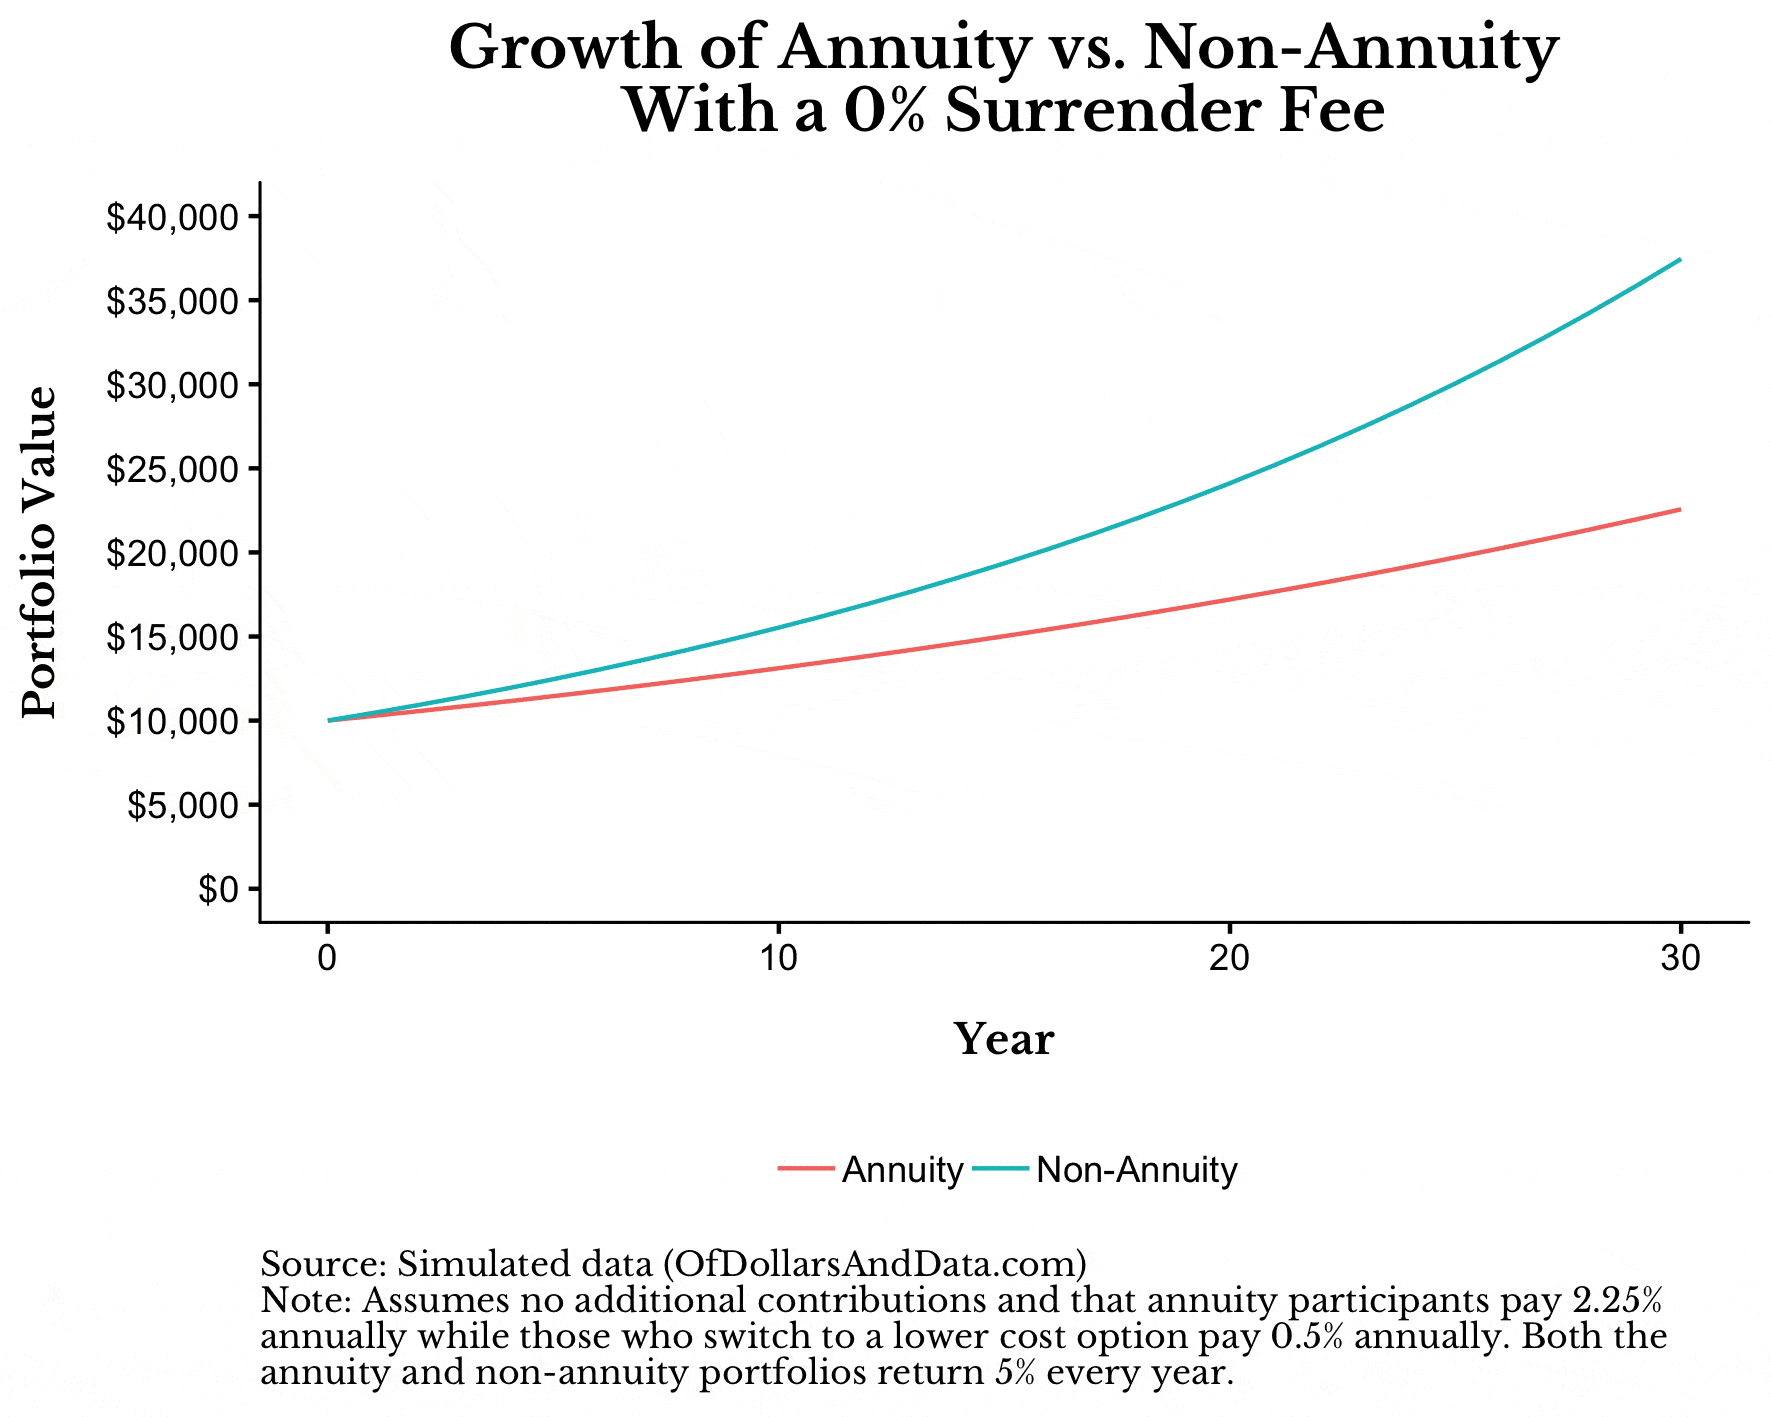 GIF of growth of annuity vs. non-annuity with varying surrender fees